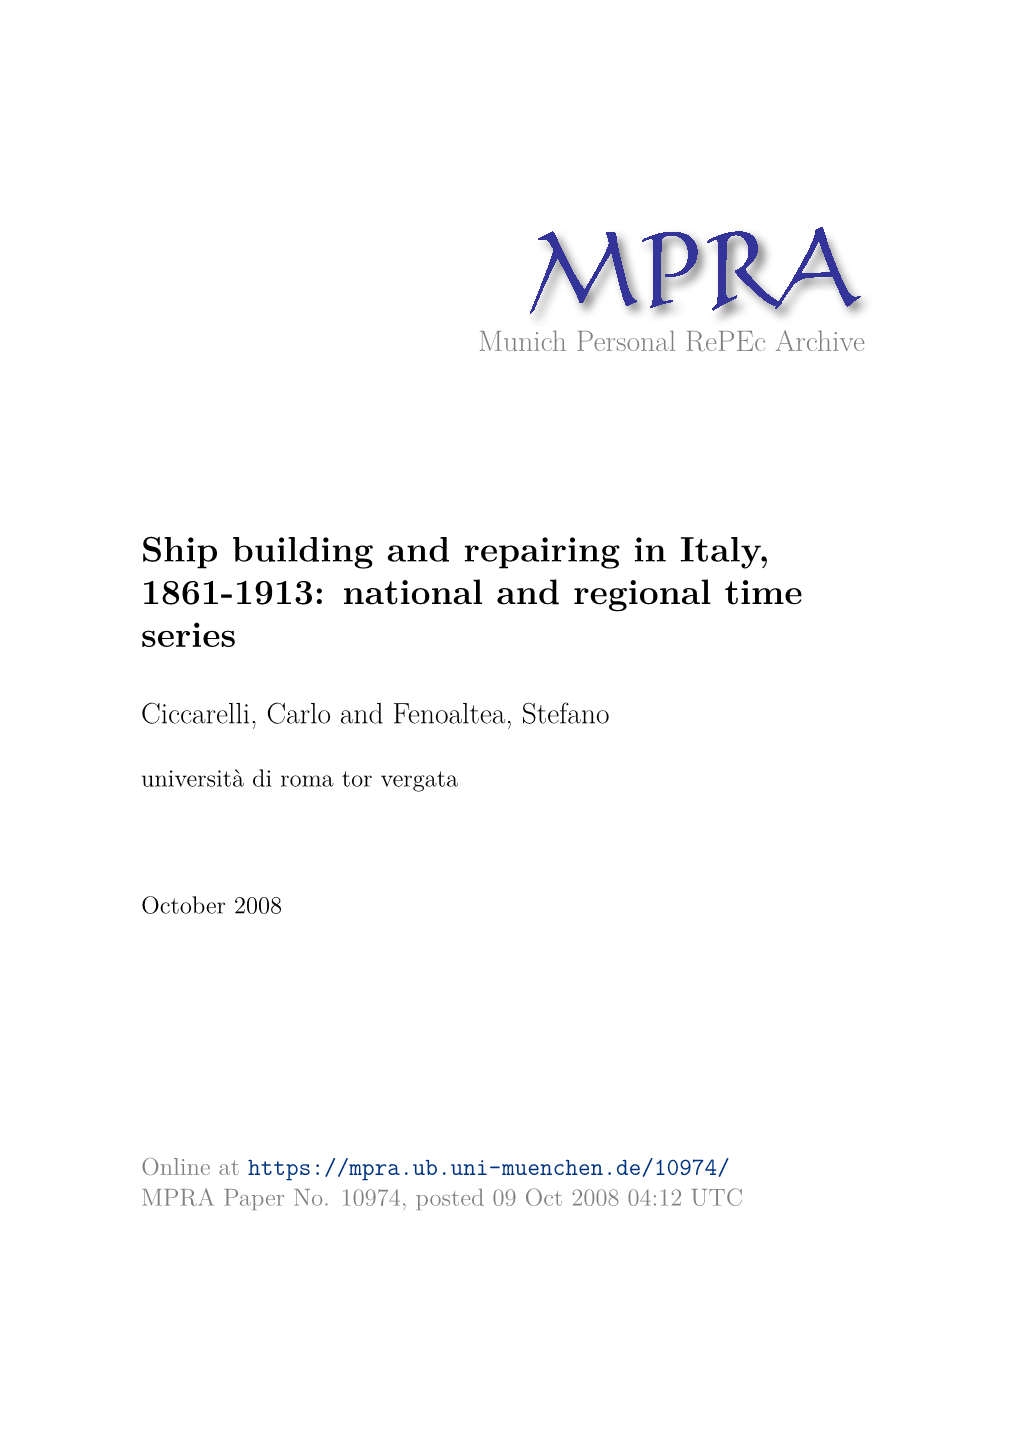 Ship Building and Repairing in Italy, 1861-1913: National and Regional Time Series